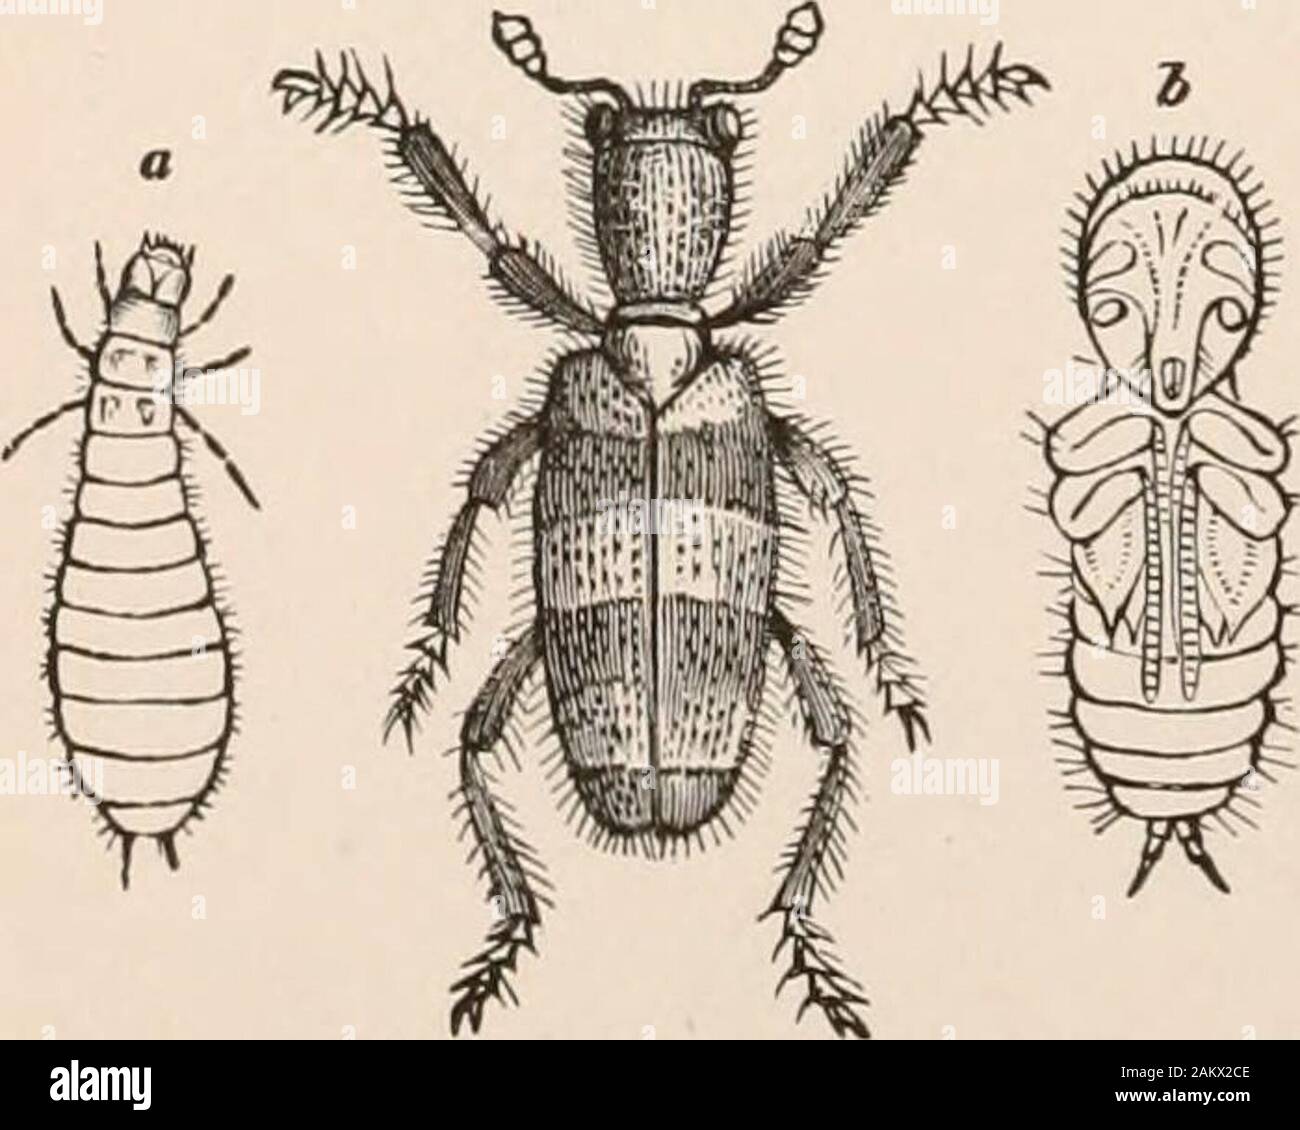 Entomology for beginners; for the use of young folks, fruitgrowers, farmers, and gardeners; . wed behind; eyes smooth. Cupescapitaf a Fabr. Family Ptinidae.—Head not narrowed behind; eyes granulated;mesothoracic epimera not reaching the coxse; antennae with usually9-11 joints, variable in form. Beetles mostly of small size, oftenliving in partly decayed vegetable matter. Ptinus fur Linn, some-times attacks museum collections. Anobium is the death-tick, and itsally, Sitodrepa paniceaF&br., has proved at times to be a museum pest.Family Cleridae.—Antennae inserted at the sides of the front, usua Stock Photo